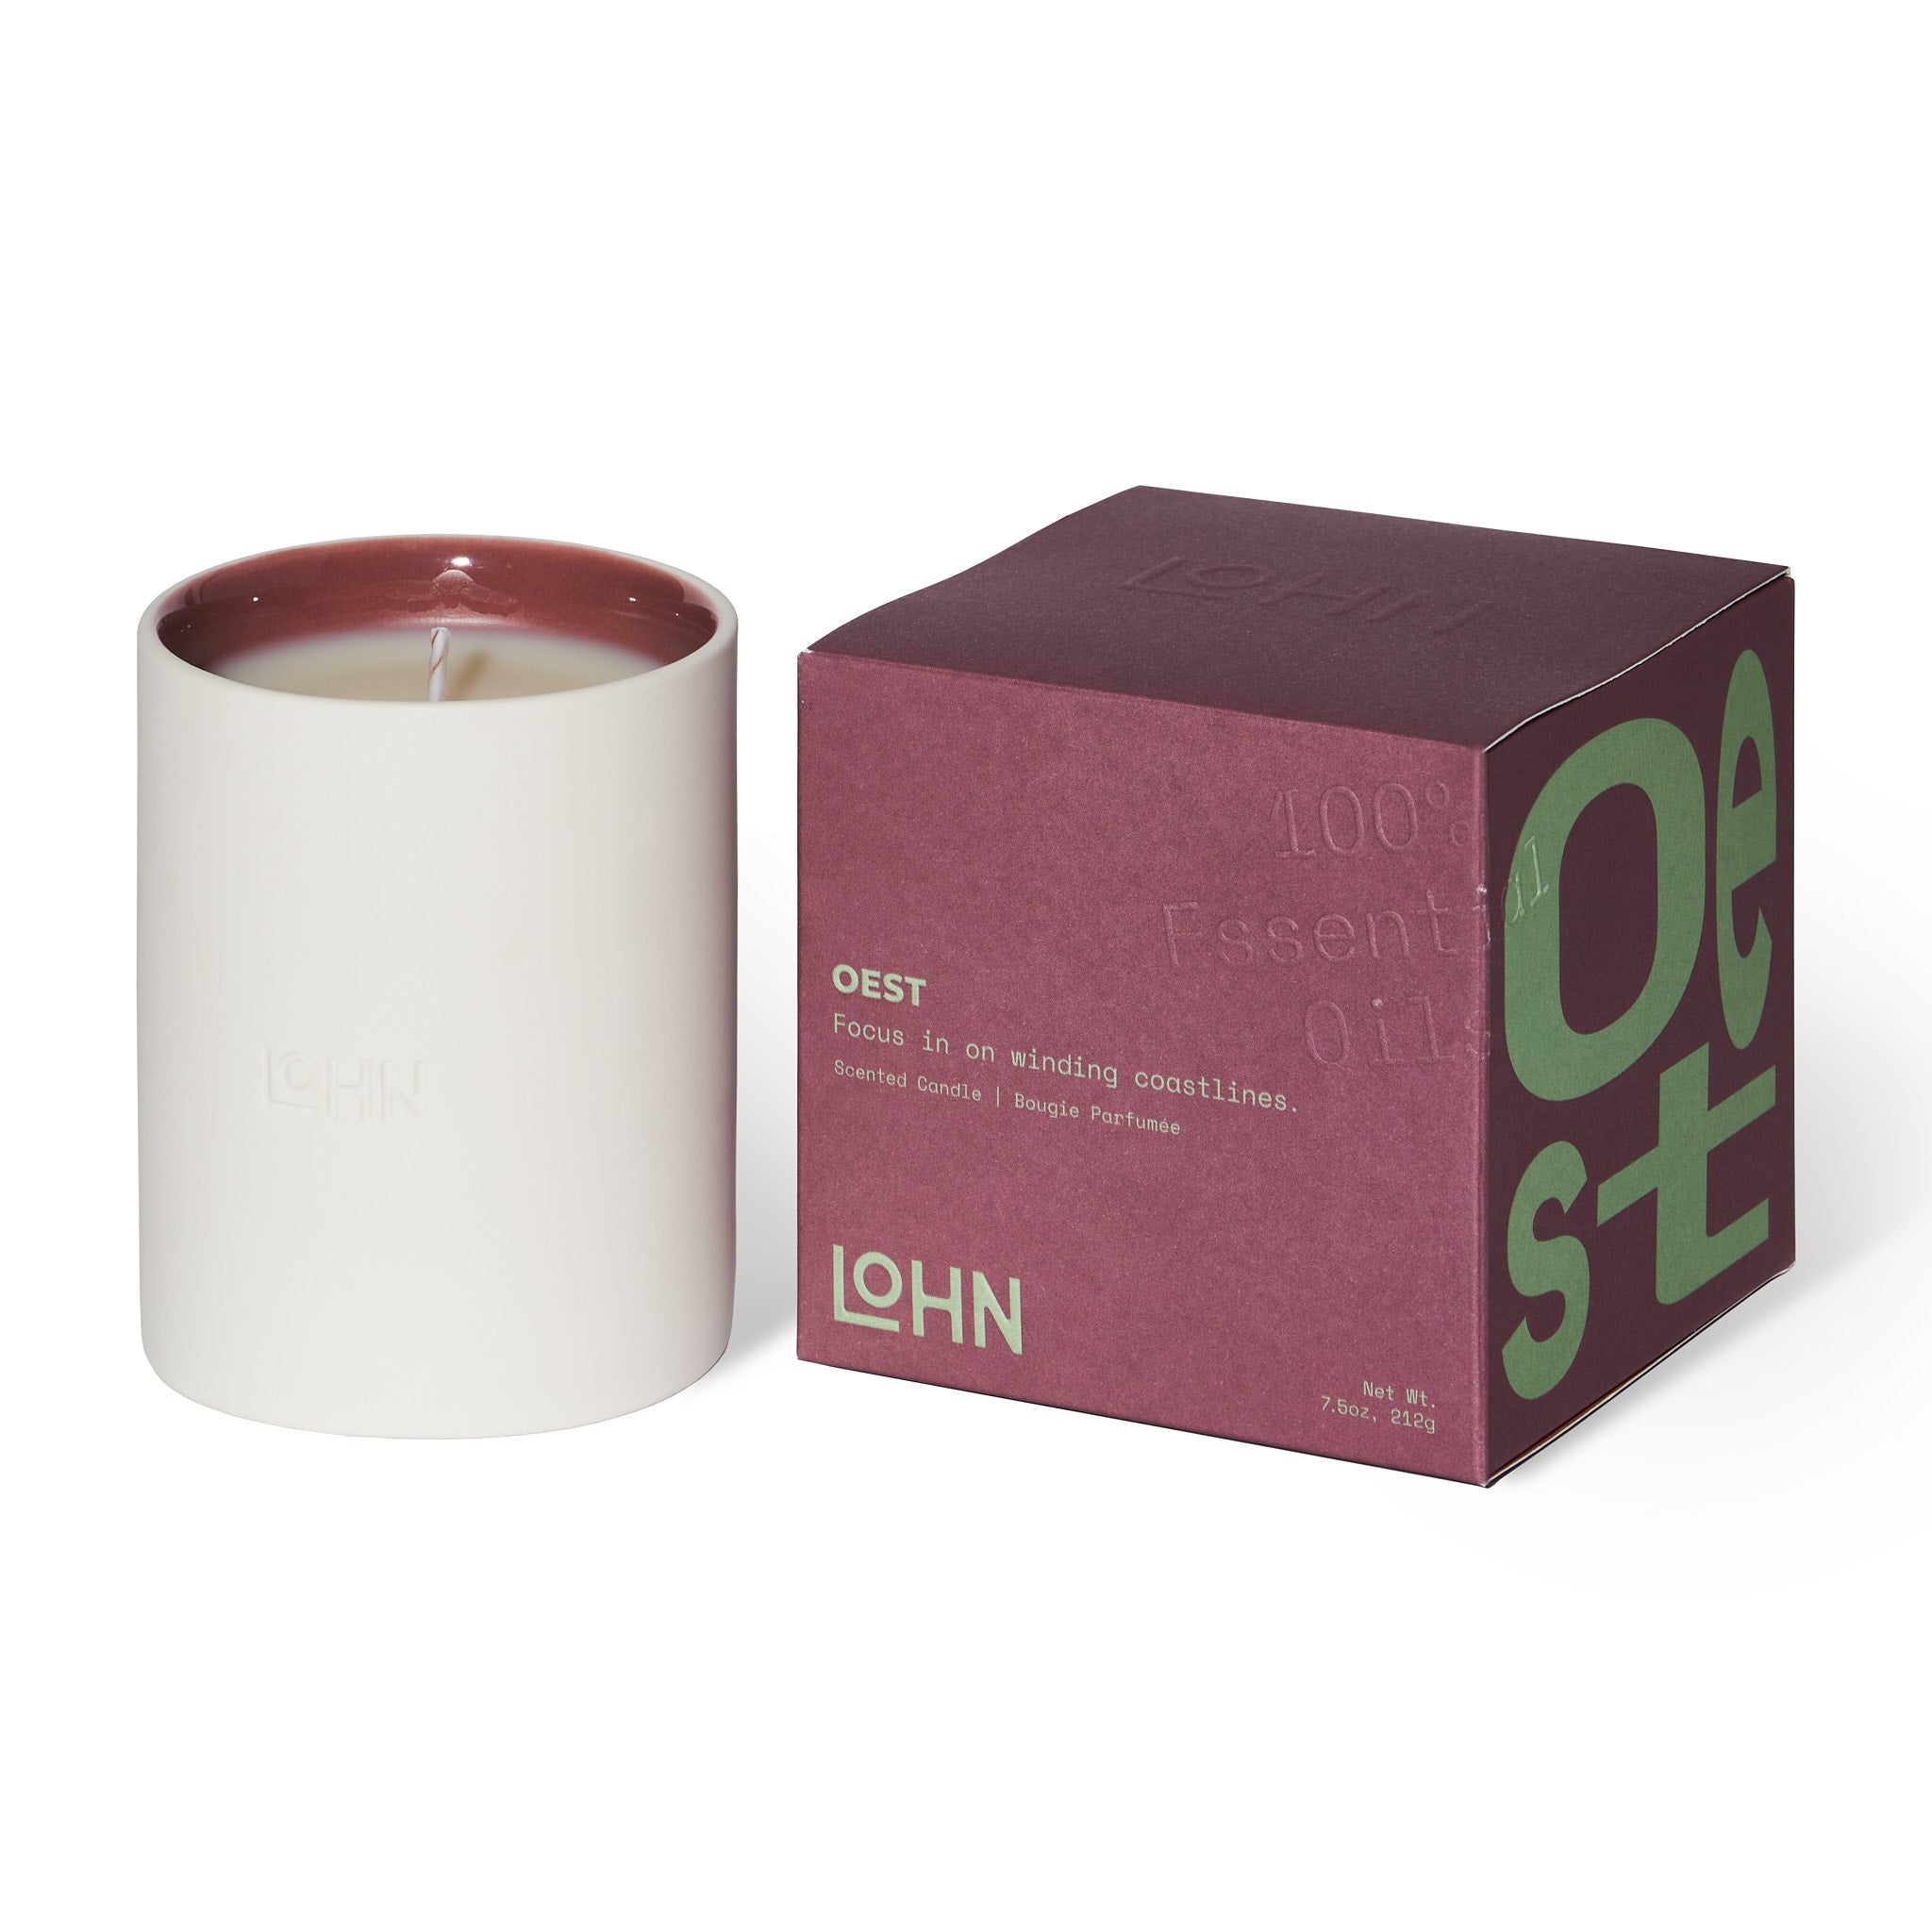 Lohn Candle Forage Collection - OEST - Black Pepper & Rosemary